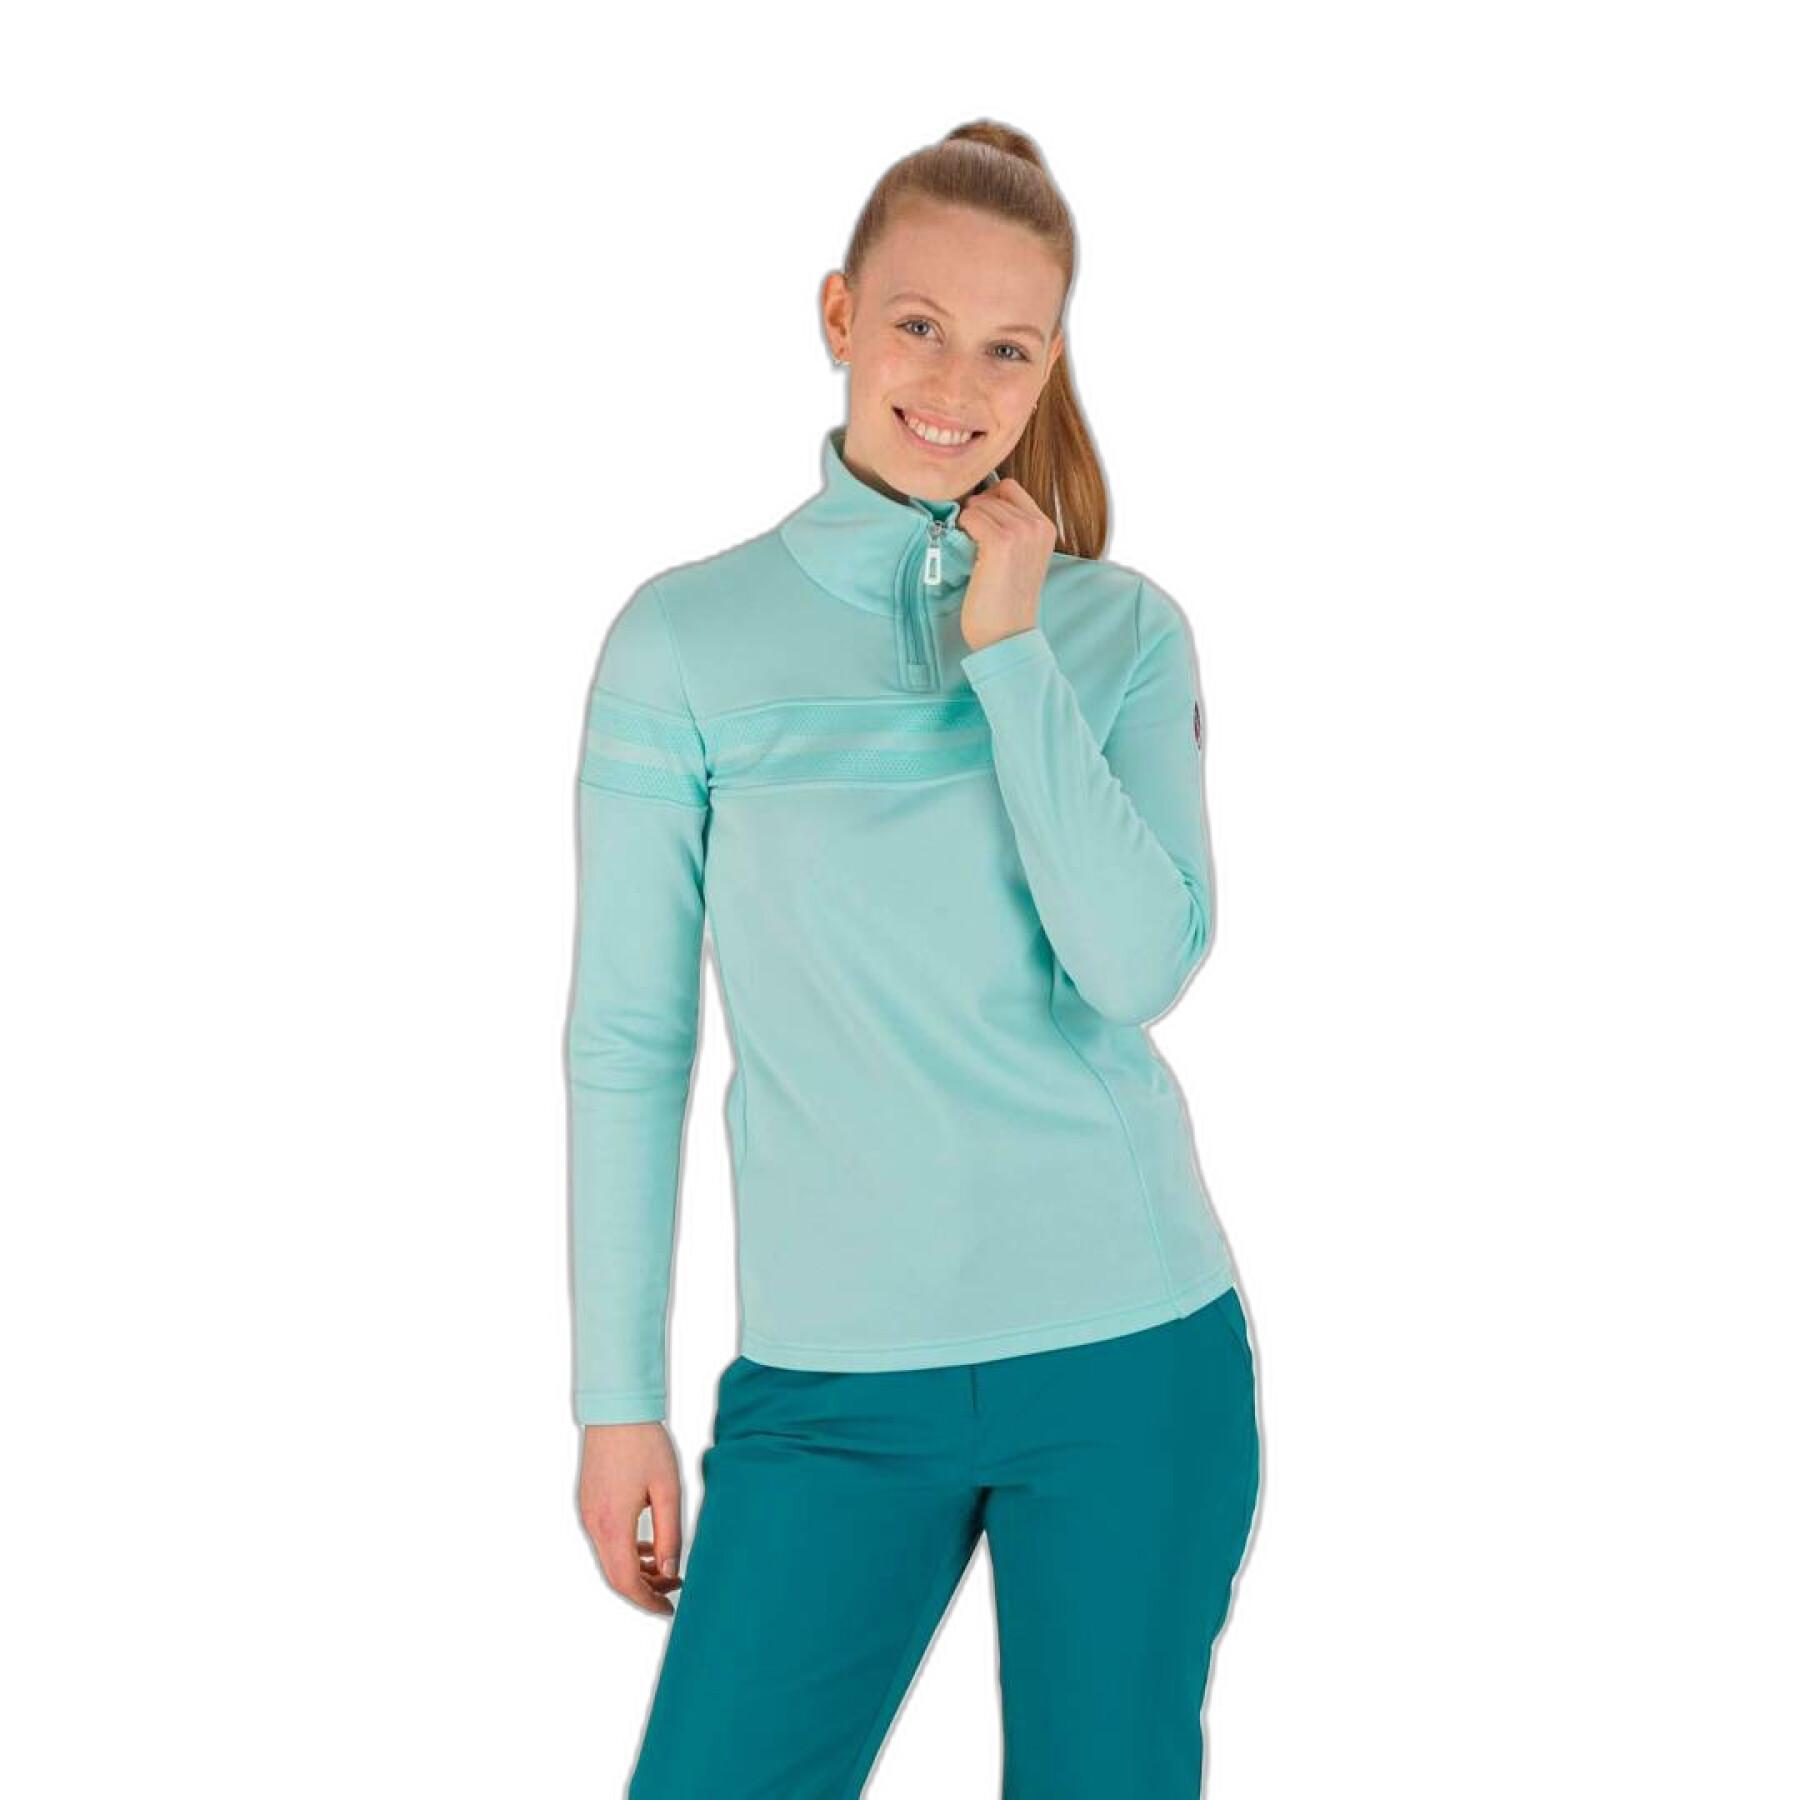 Women's compression jersey Rossignol Infini Race - Base layers - Women's  clothing - Winter Sports